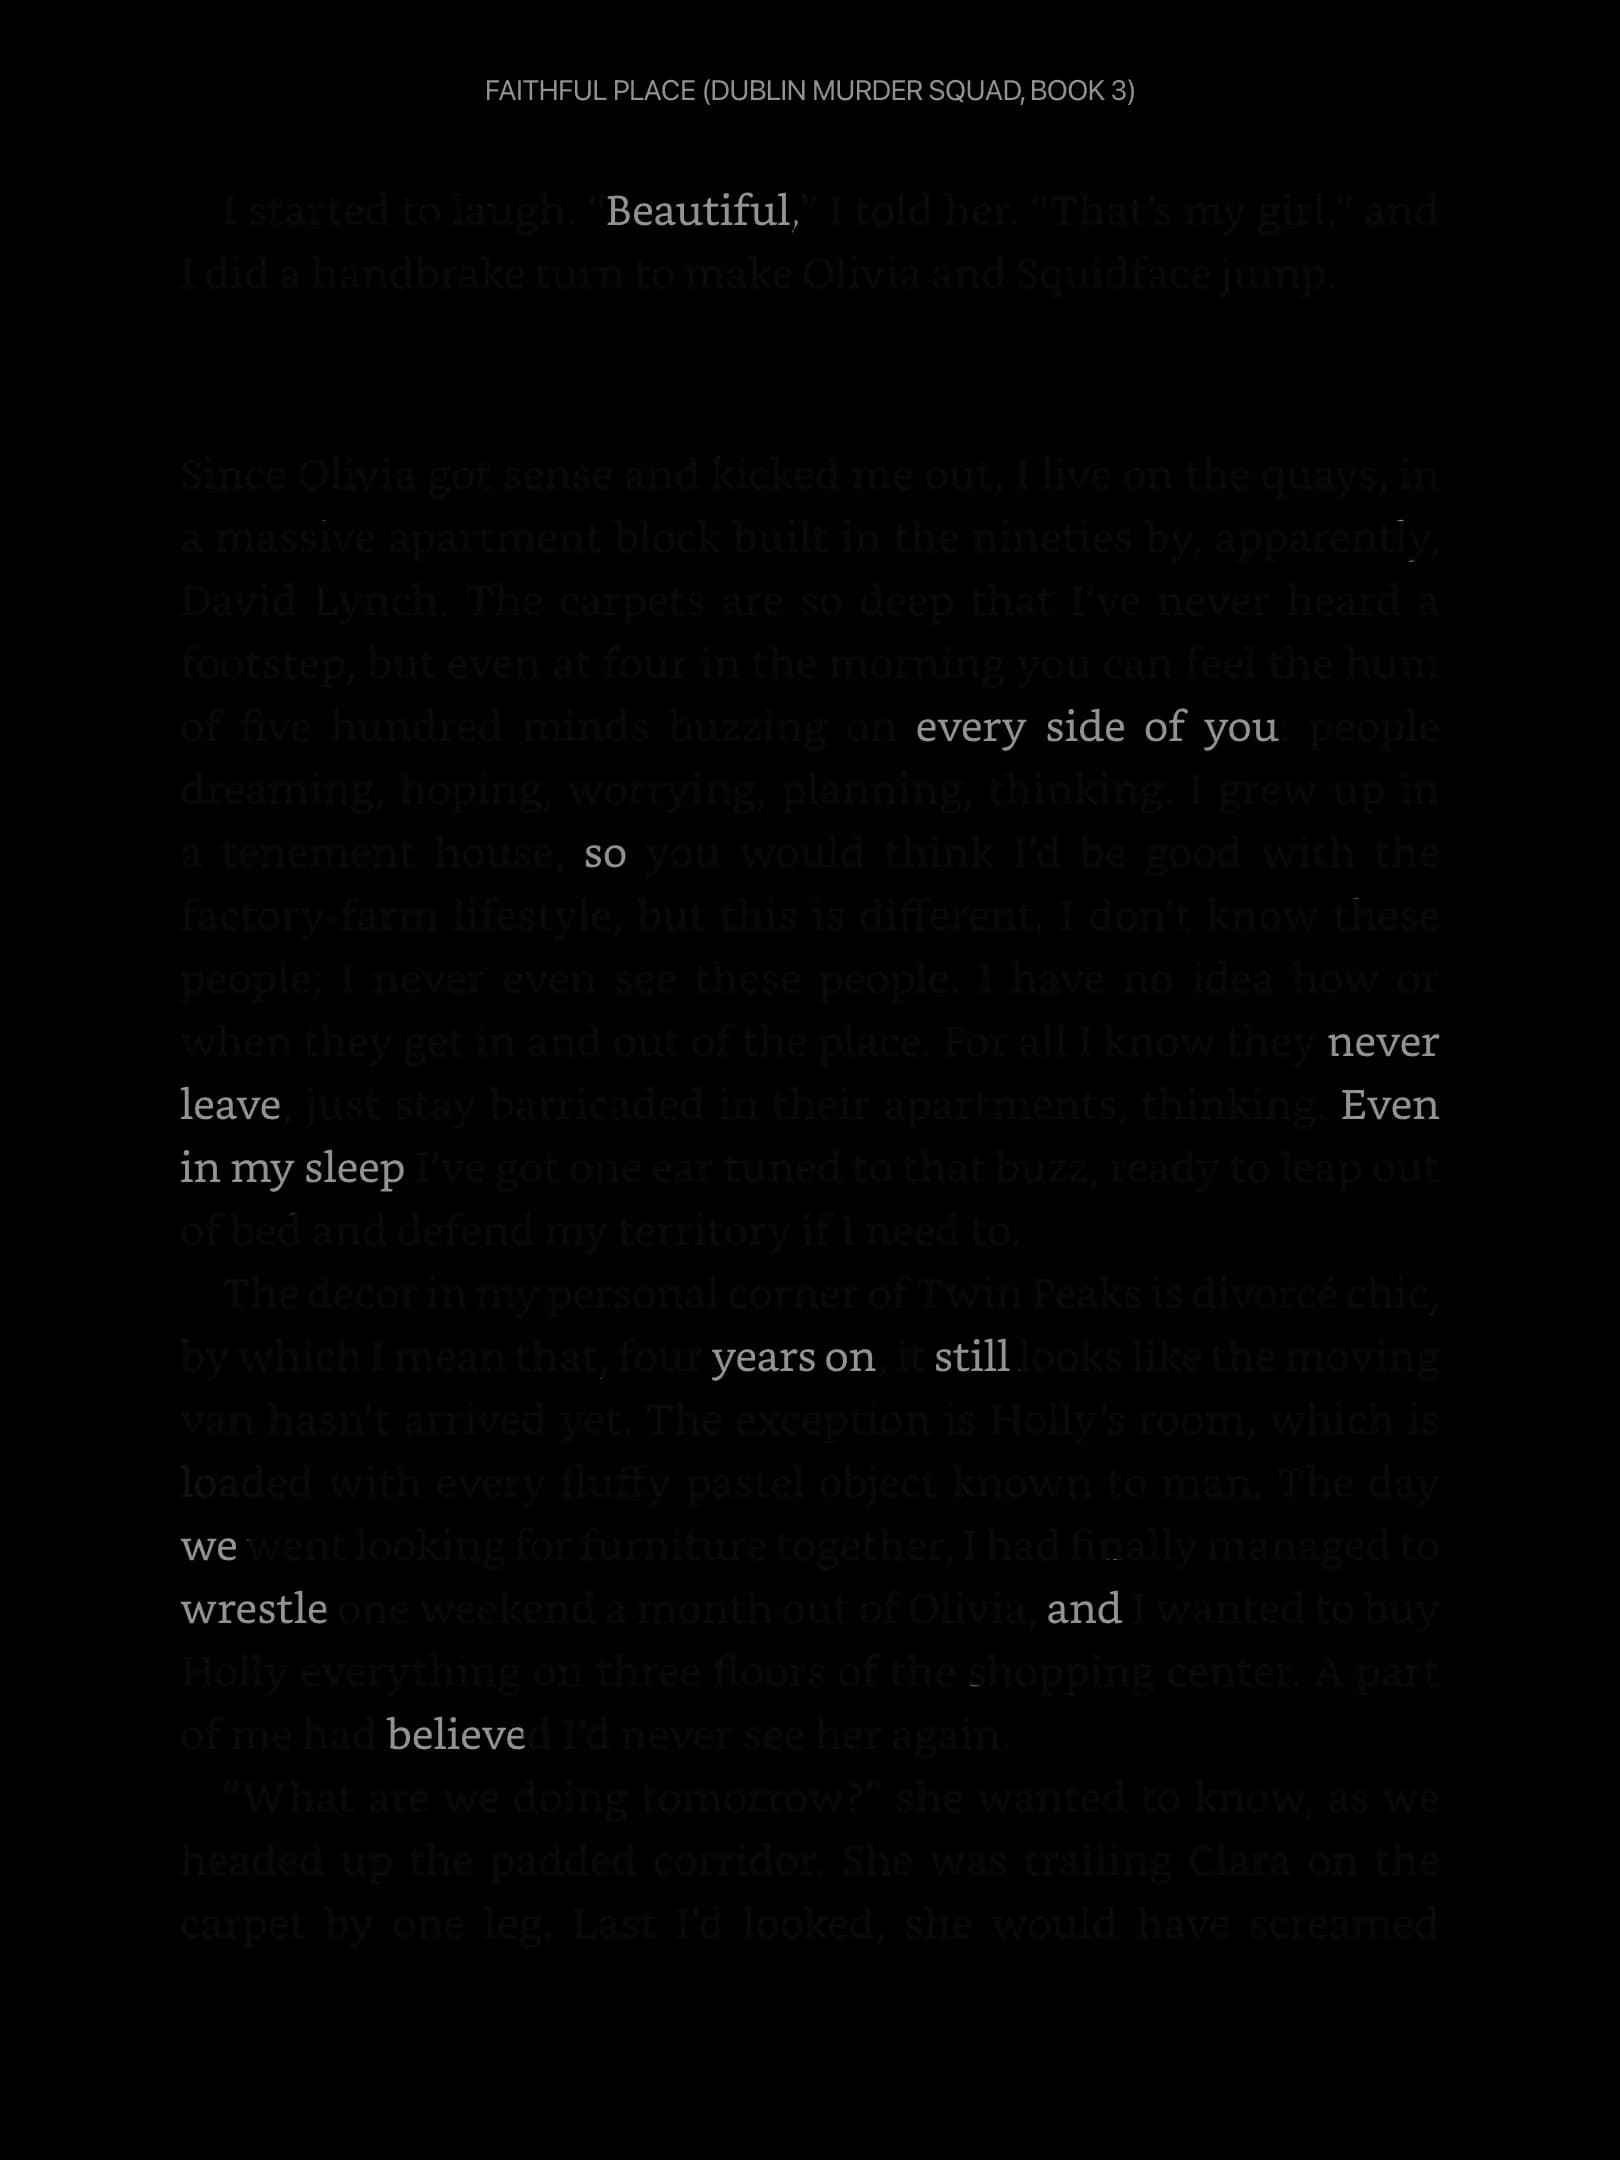 even in my sleep blackout poetry